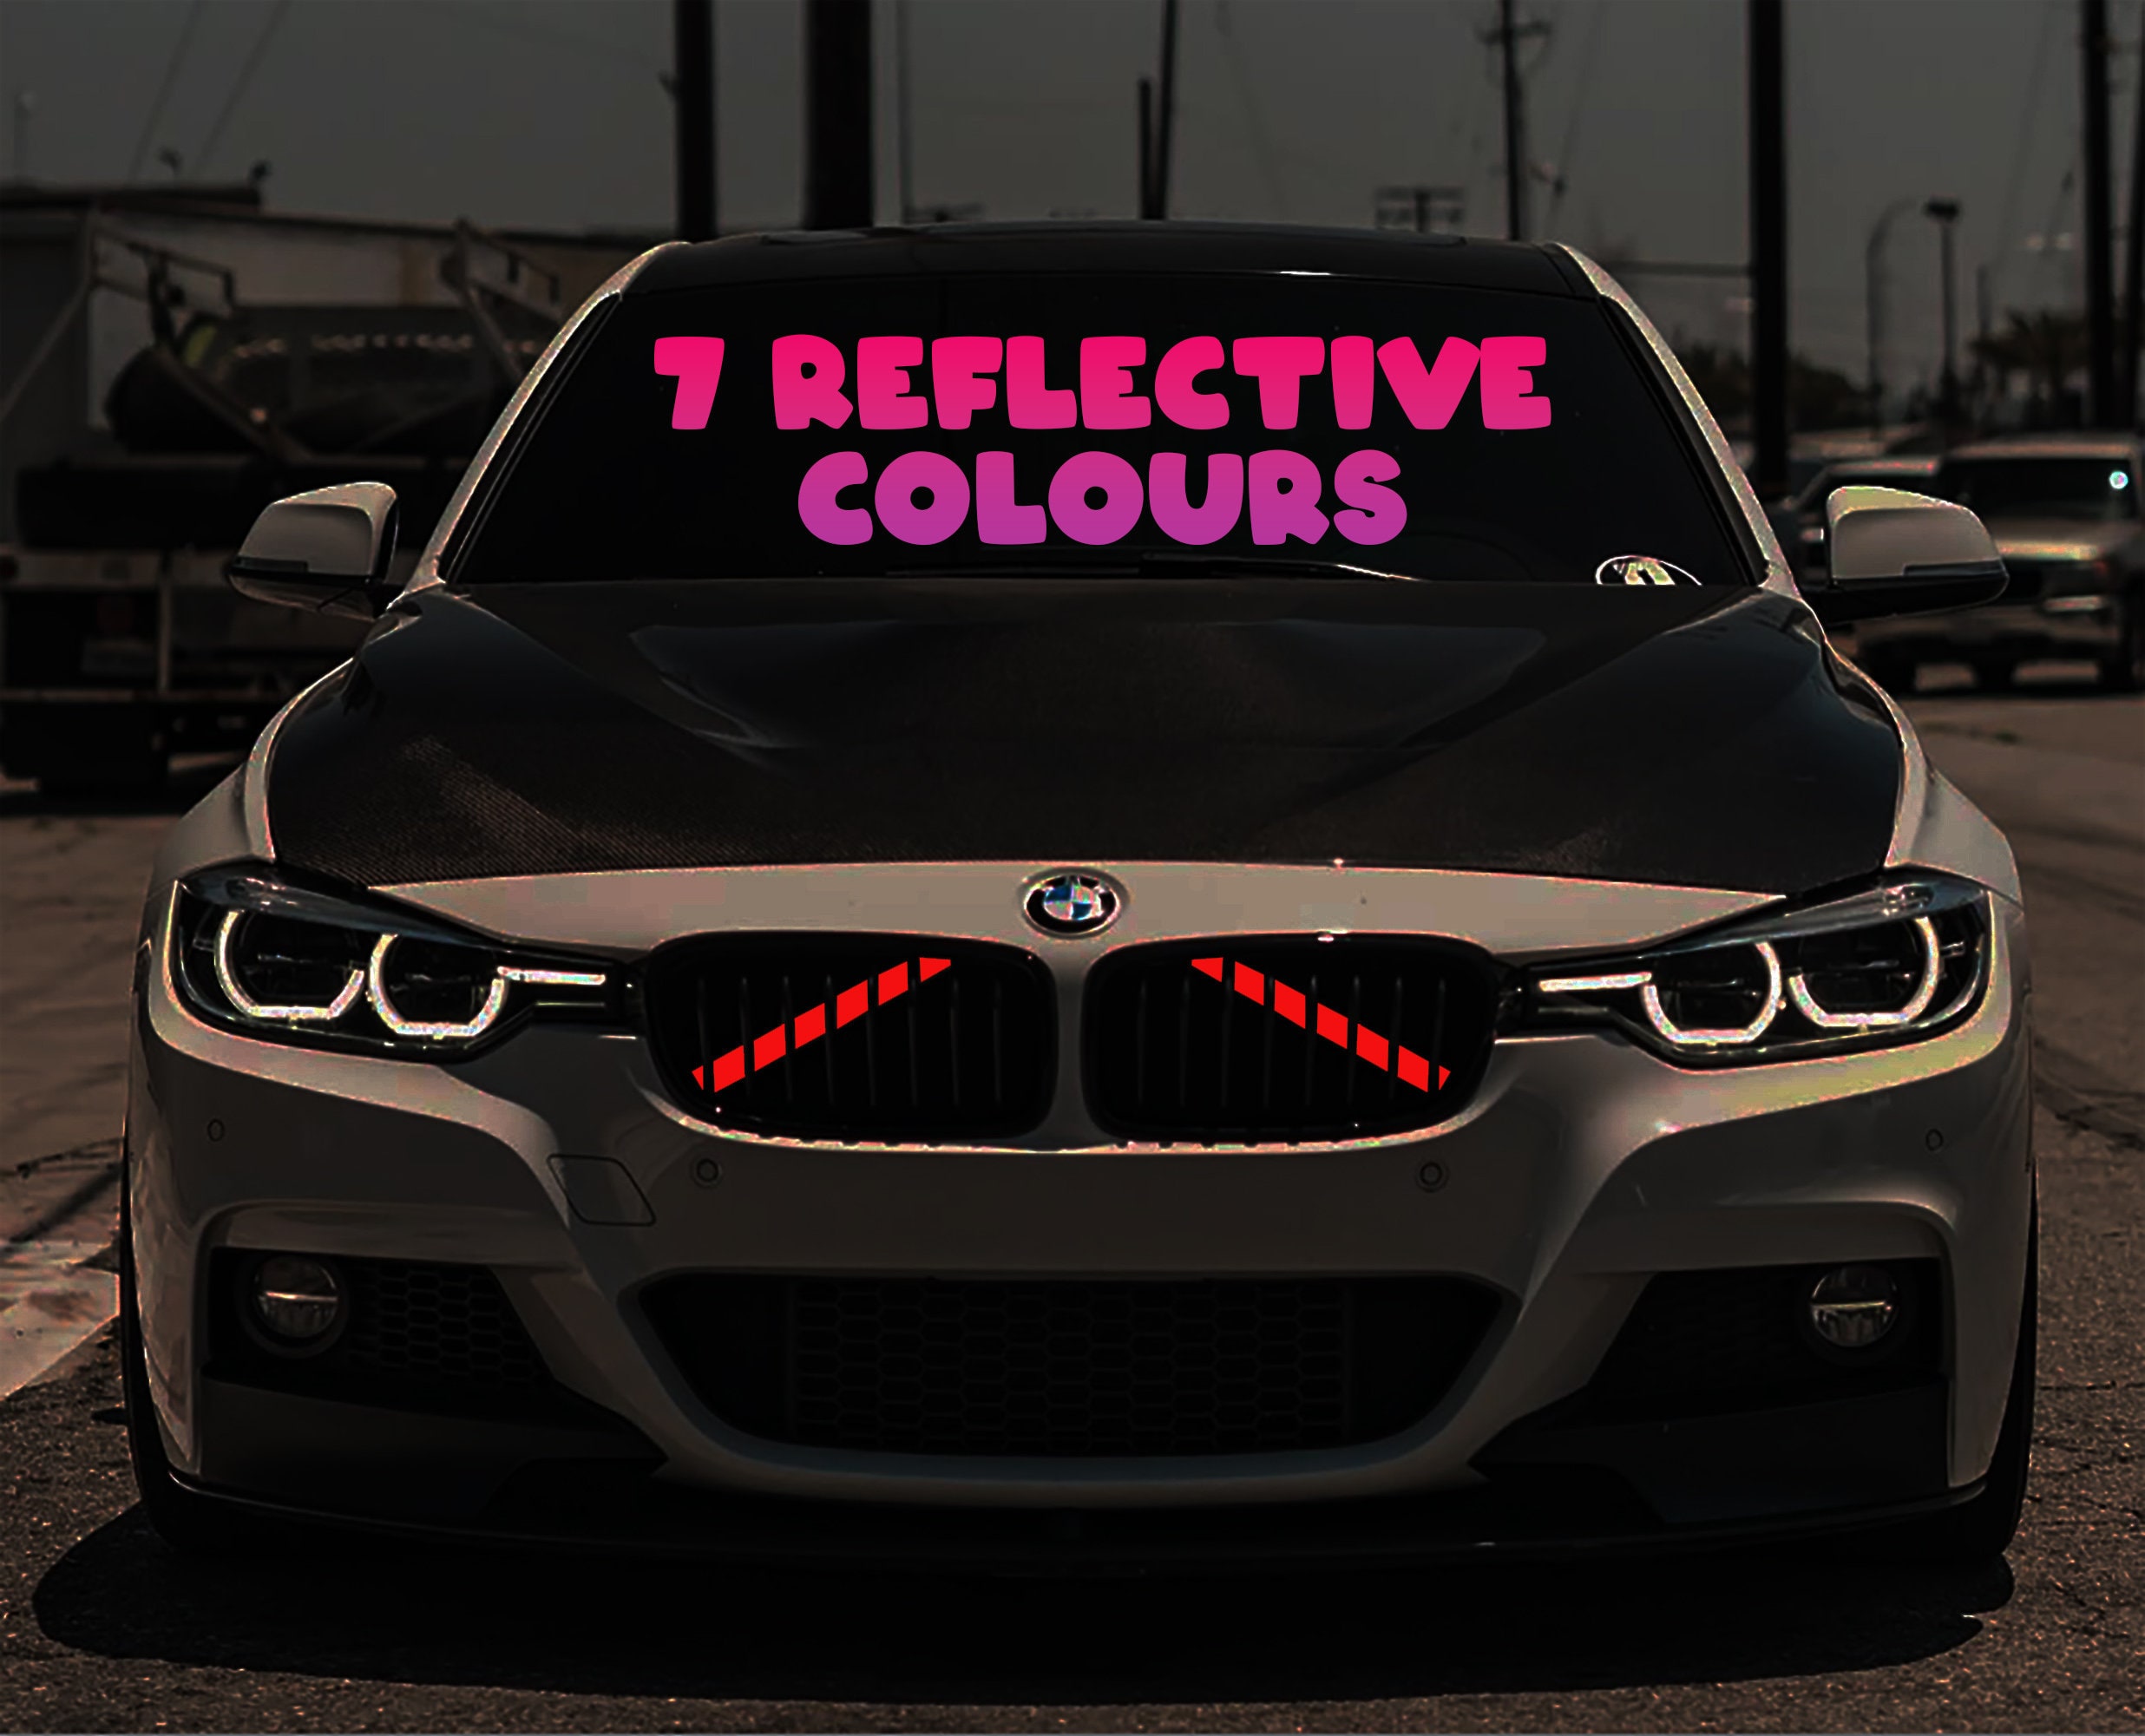 Evil Eyes Car Motorcycle Helmet Stickers Pet Reflective Car Body Style  Decor Personalized Decoration Bike Helmet Sticker Decals - Car Stickers -  AliExpress